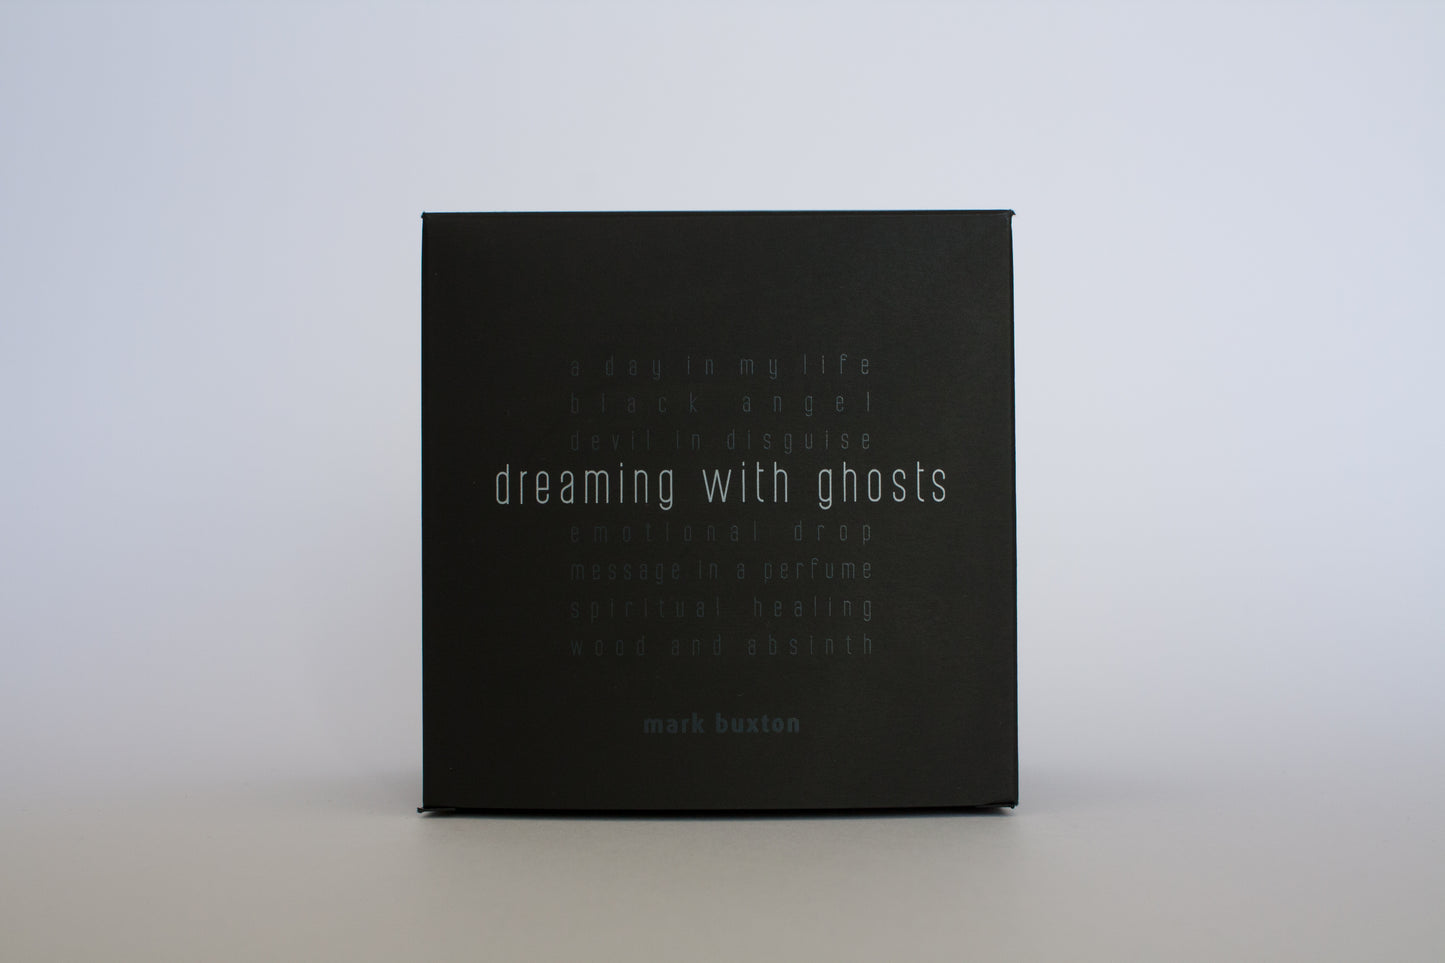 Dreaming with ghosts